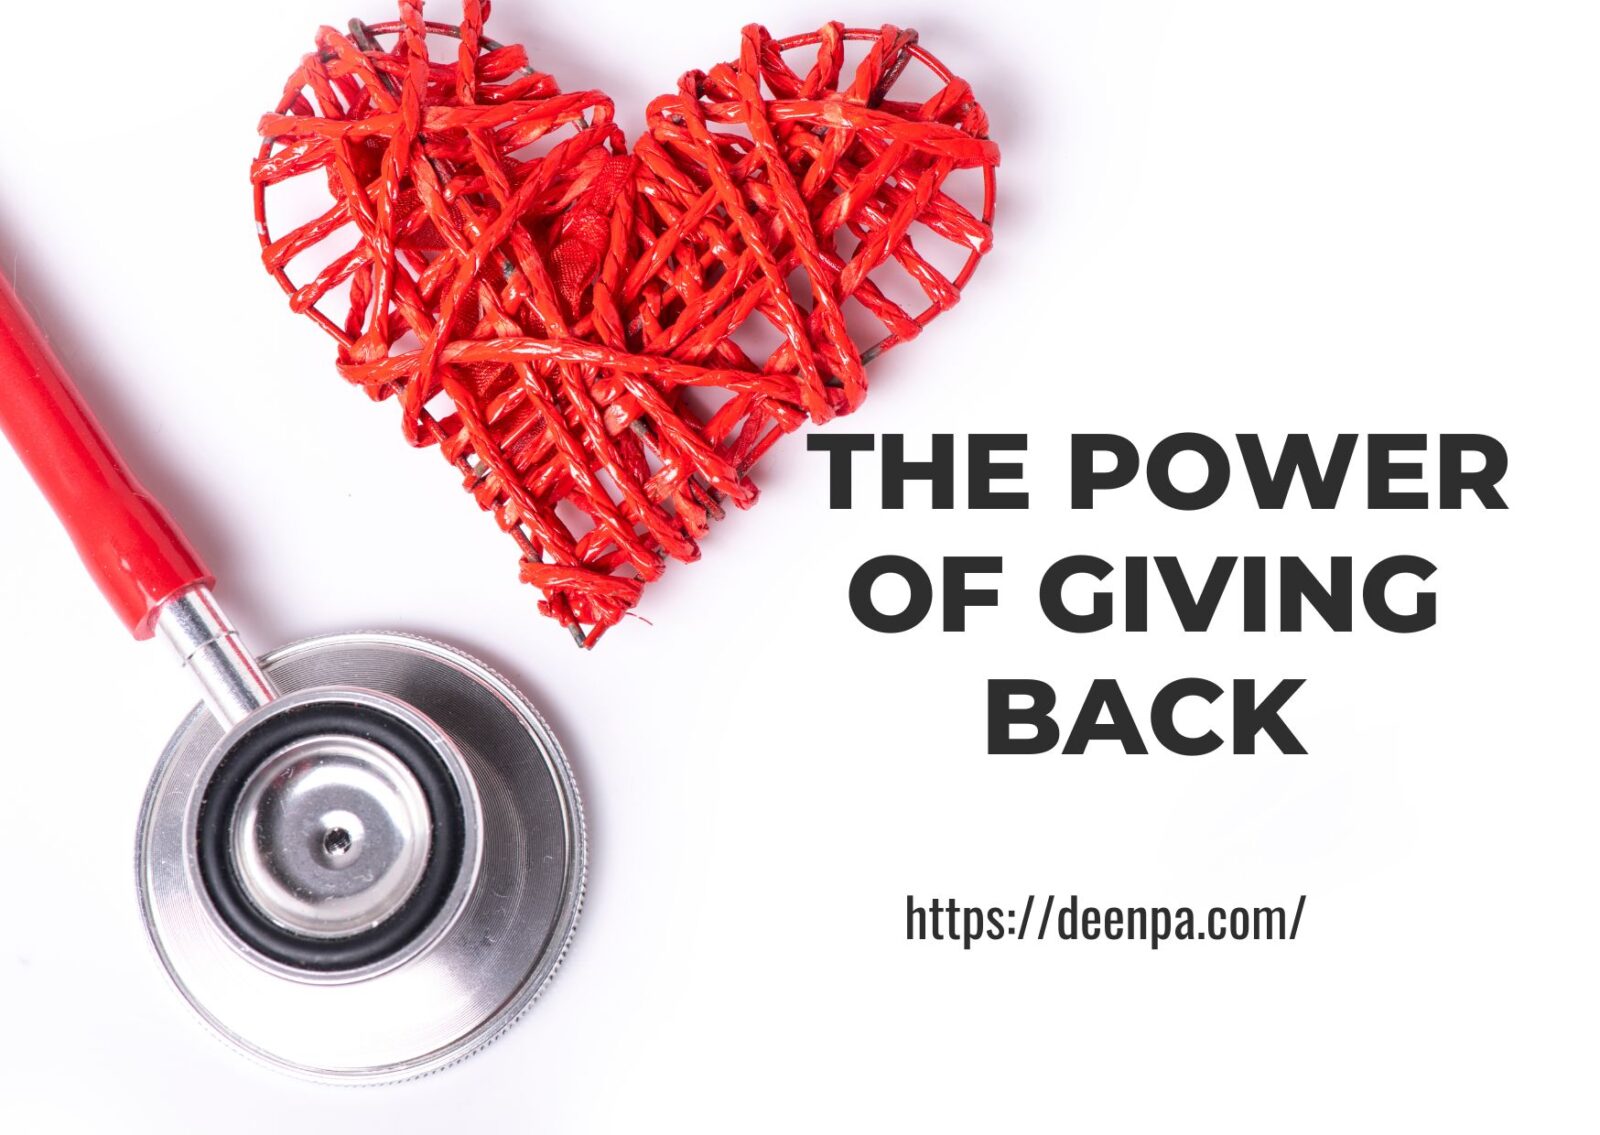  The Power of Giving Back